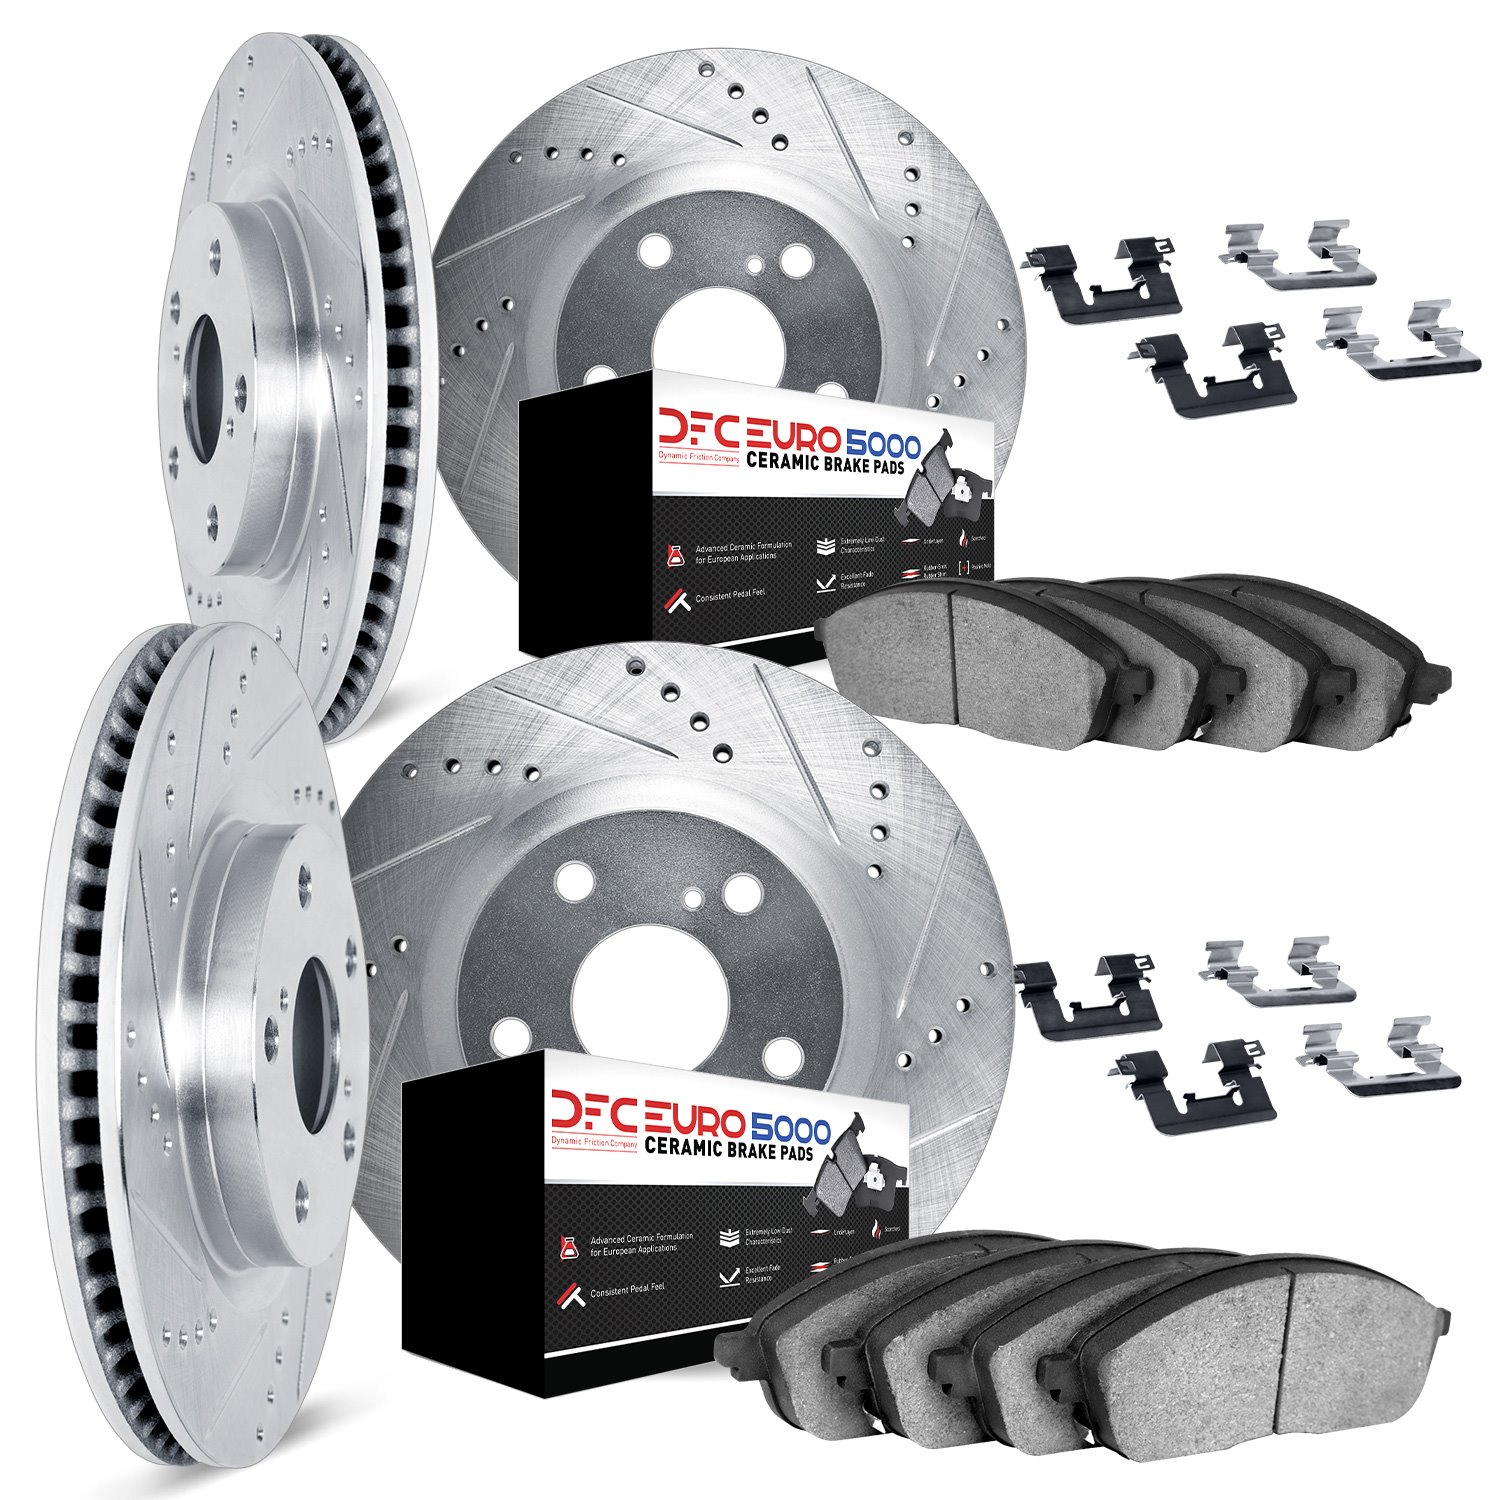 7614-31023 Drilled/Slotted Brake Rotors w/5000 Euro Ceramic Brake Pads Kit & Hardware [Silver], 2008-2013 BMW, Position: Front a